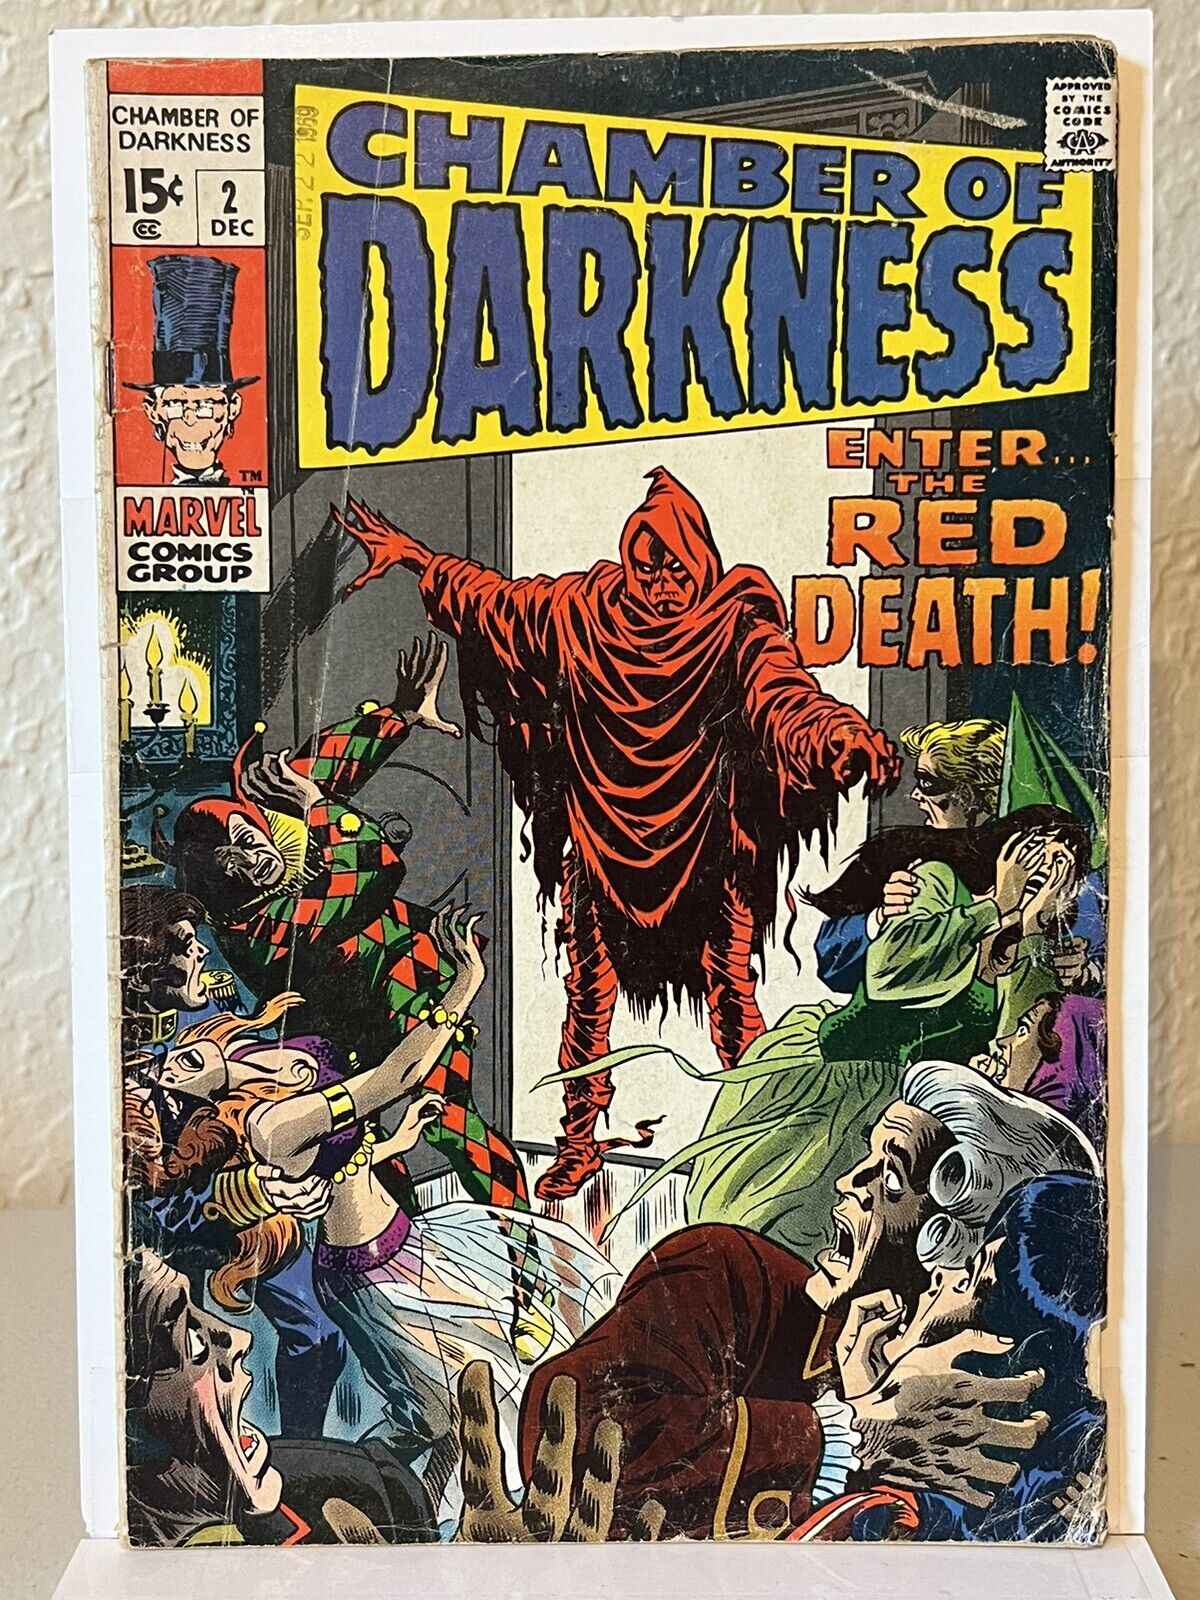 Chamber of Darkness #2 * 1969 Marvel Comics * Last Silver Age Issue * Horror